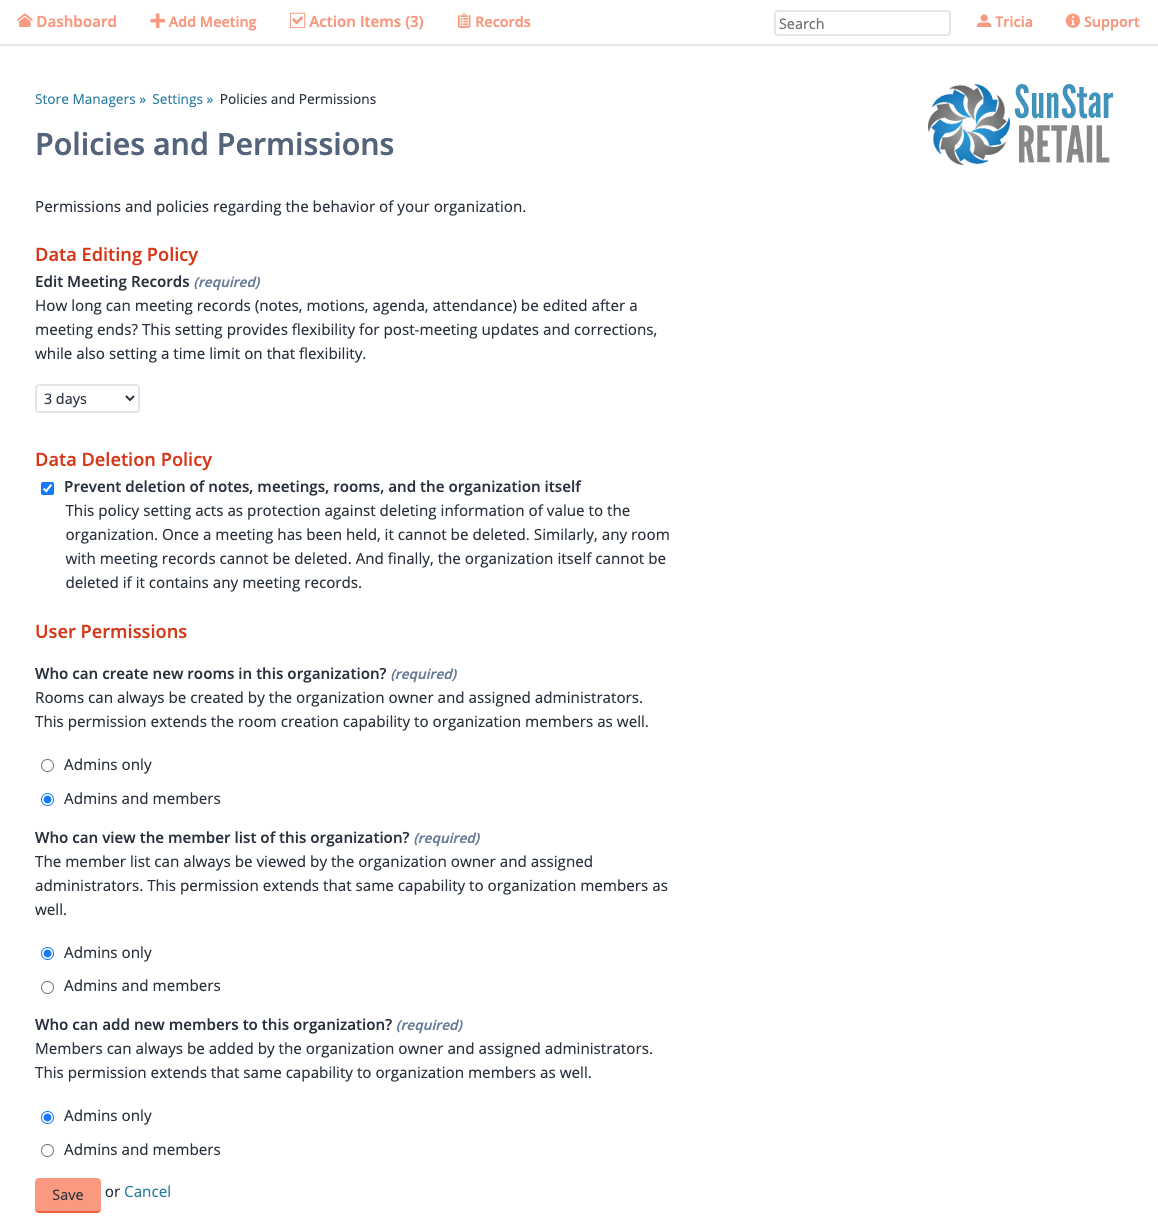 Policies and permissions